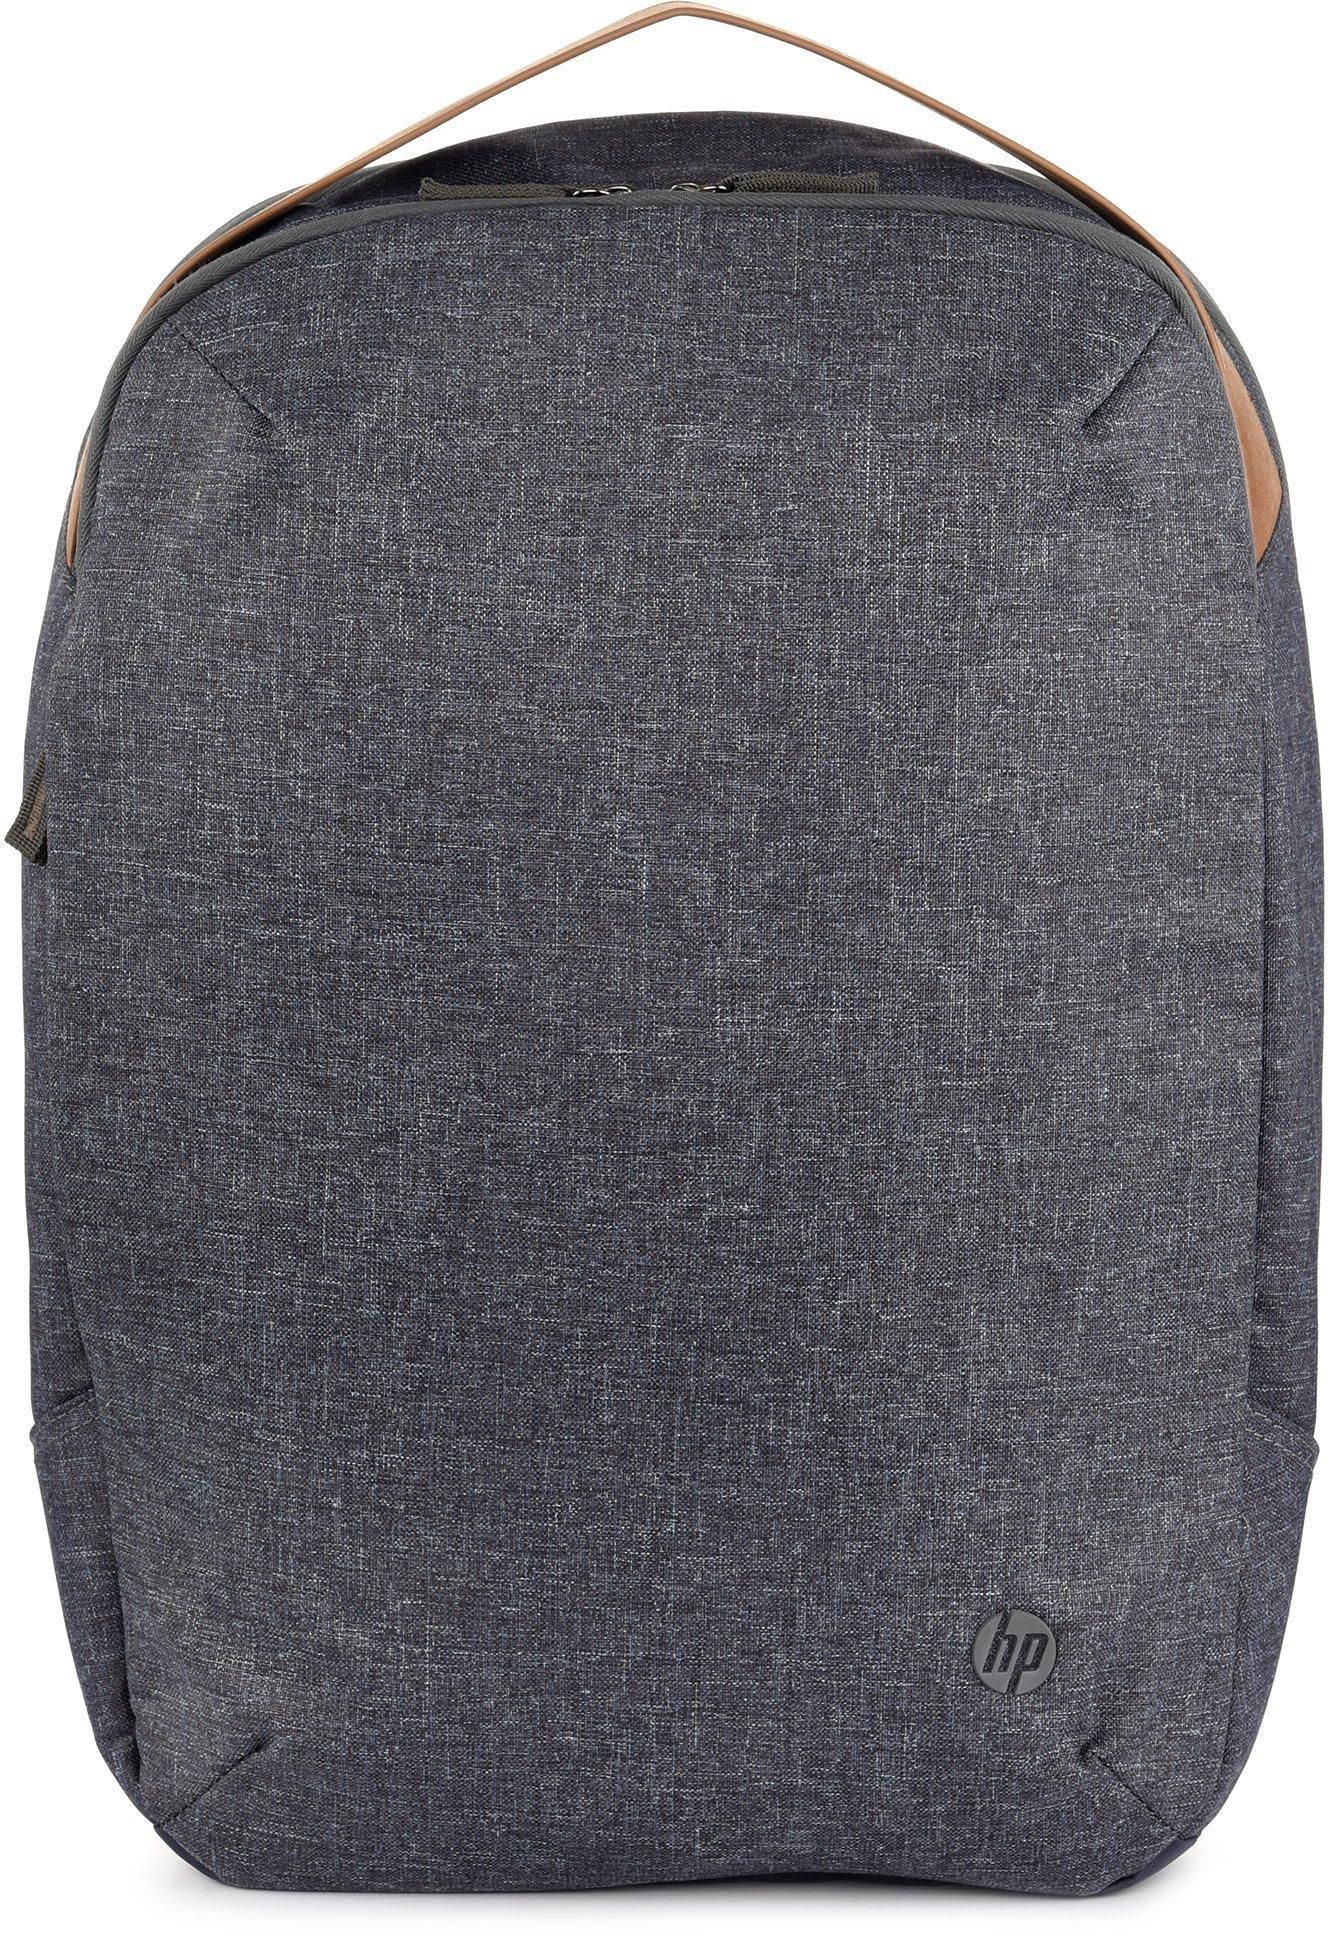 HP, Renew, 15 inch Backpack, Navy Blue